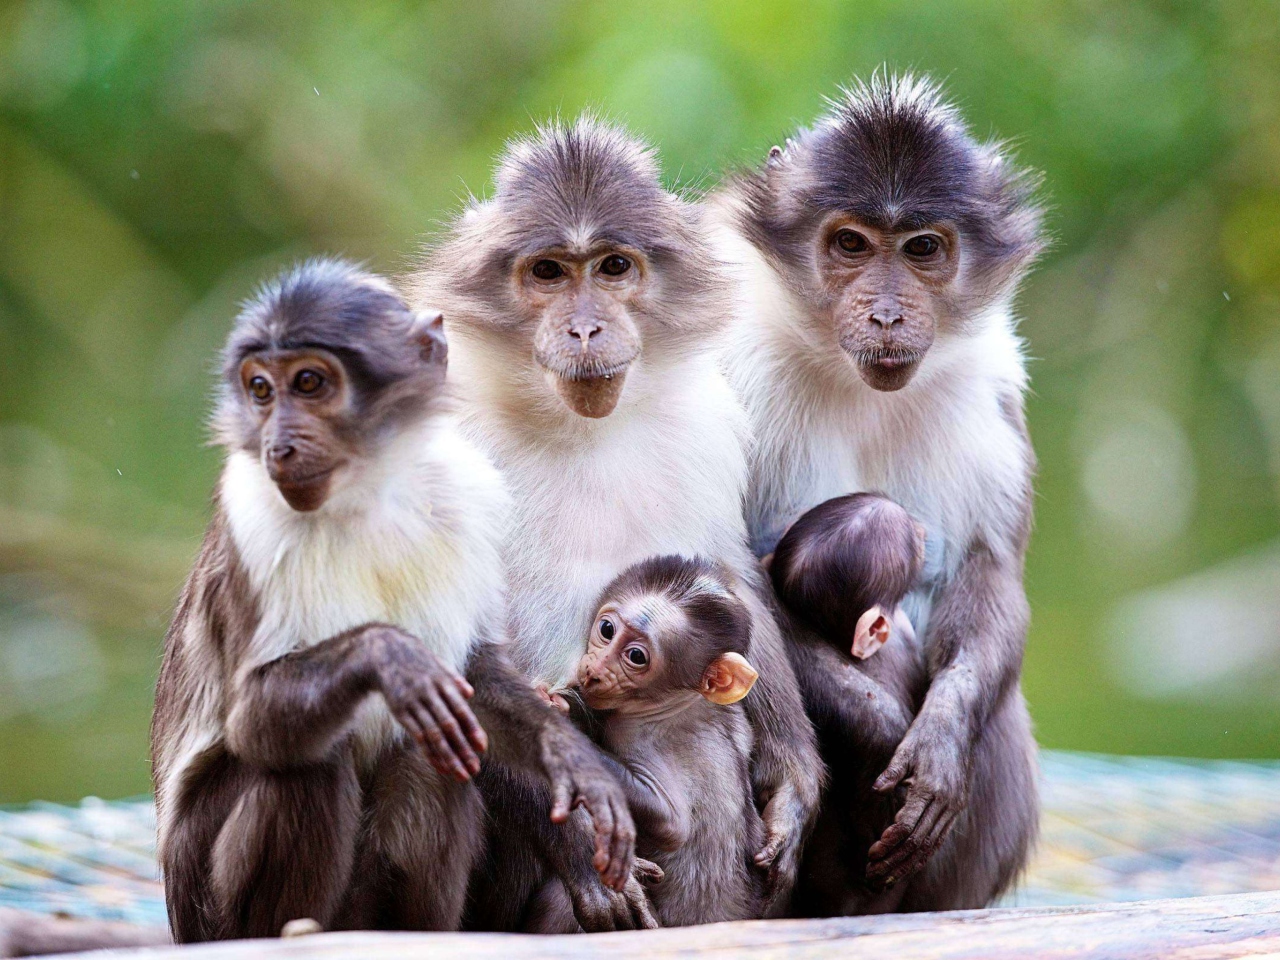 Funny Monkeys With Their Babies screenshot #1 1280x960